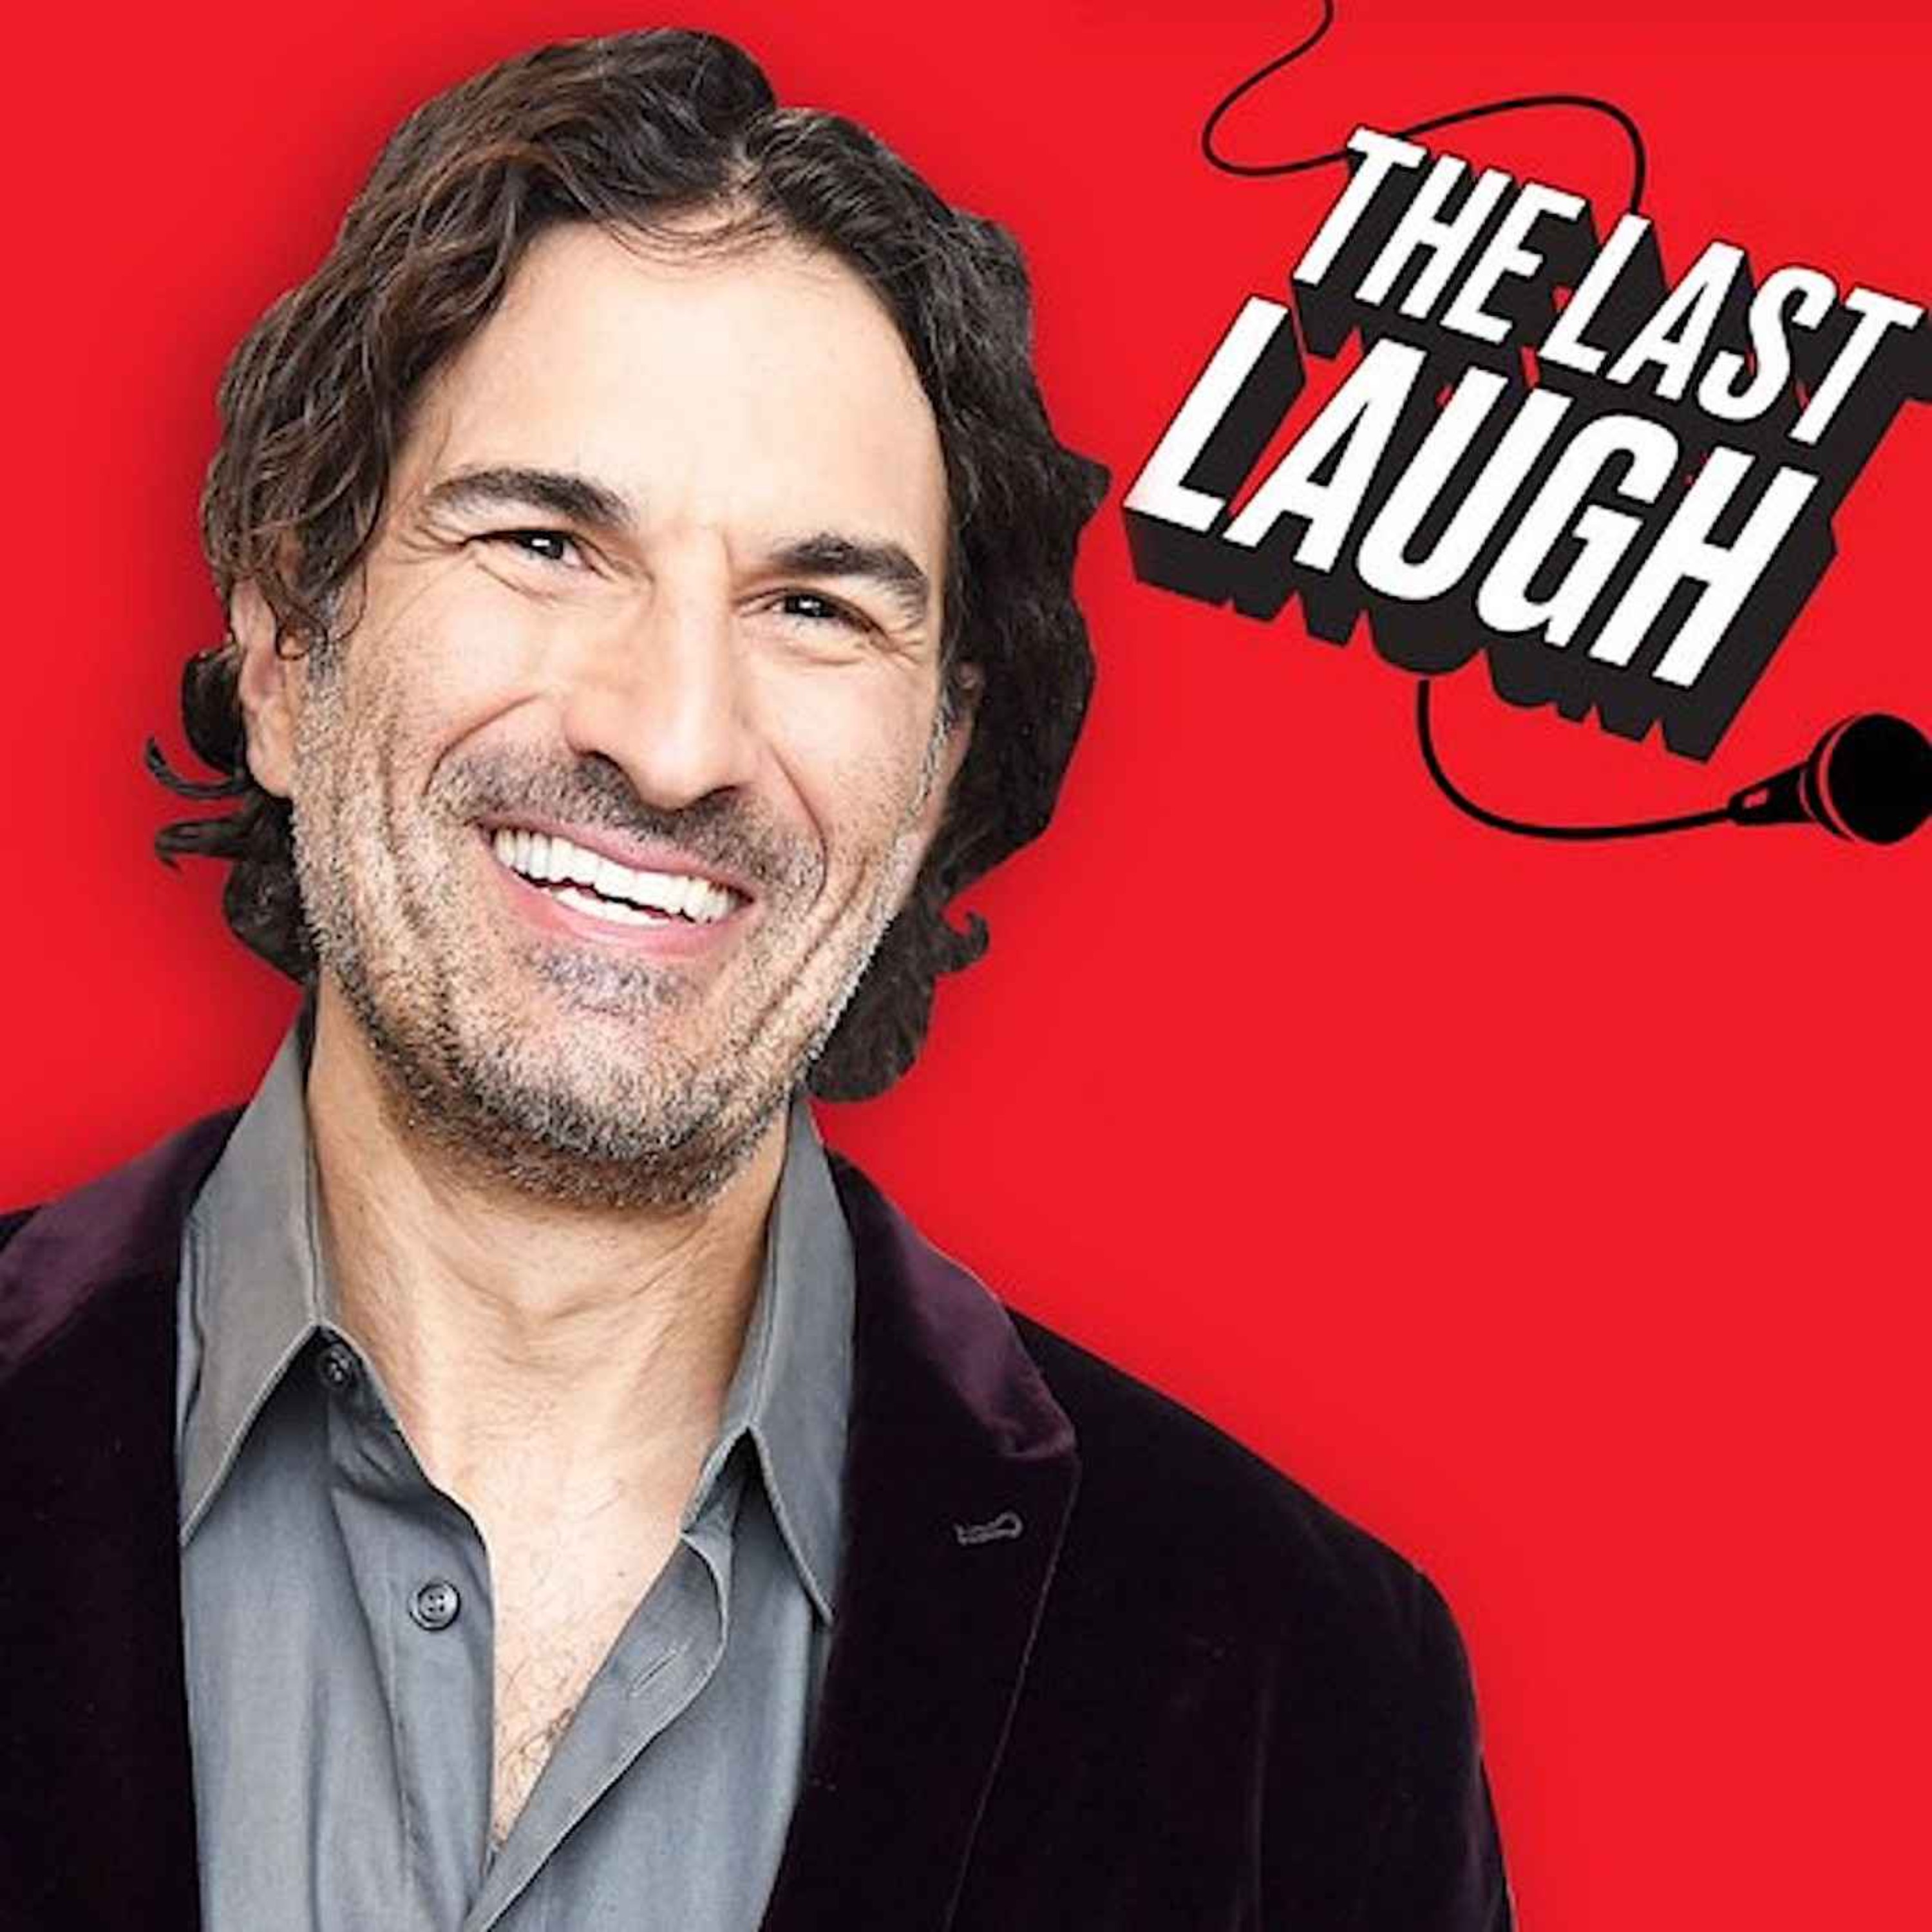 Gary Gulman on Growing Up a ‘Misfit’ and ‘The Great Depresh’